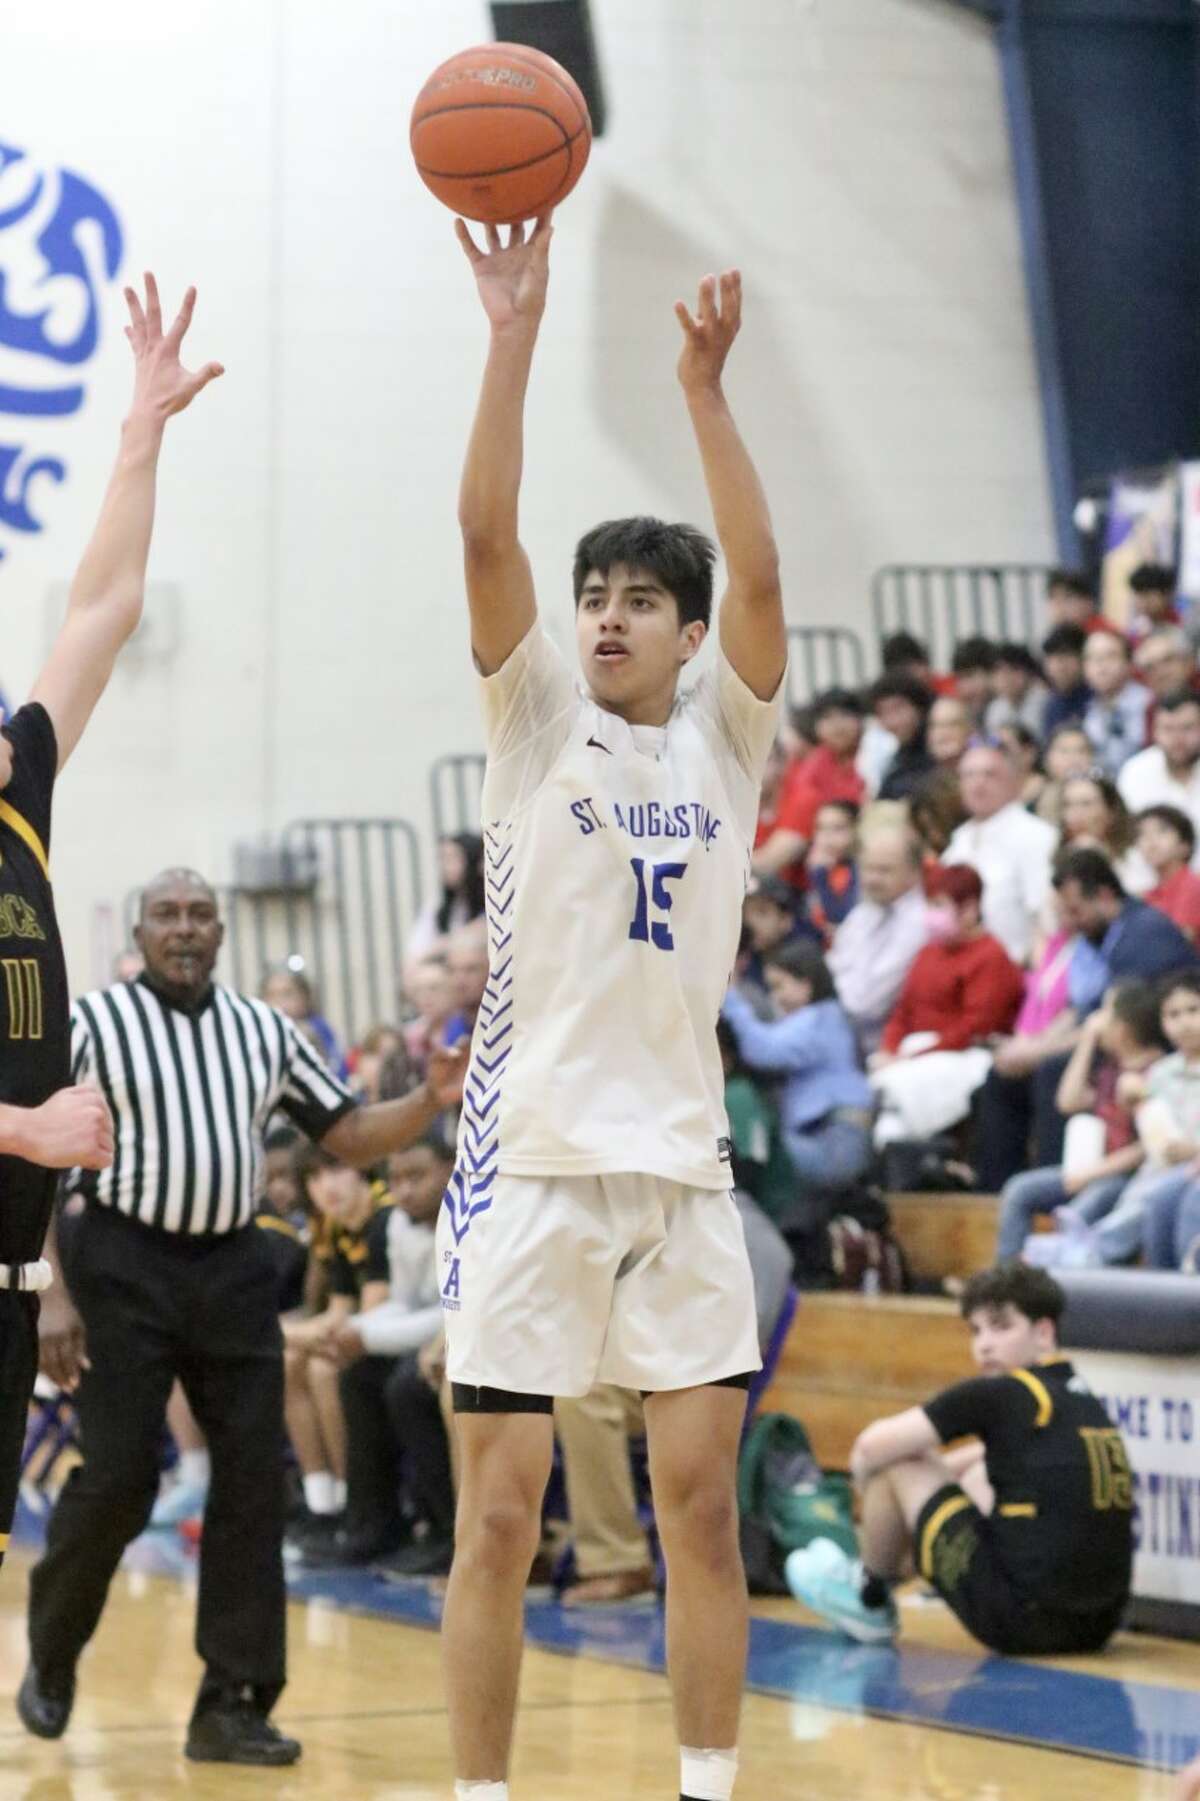 Chris Ramirez scored a game-high 28 points on Saturday, Feb. 18 as St. Augustine beat Second Baptist 55-52 to earn its first trip to the Final Four.